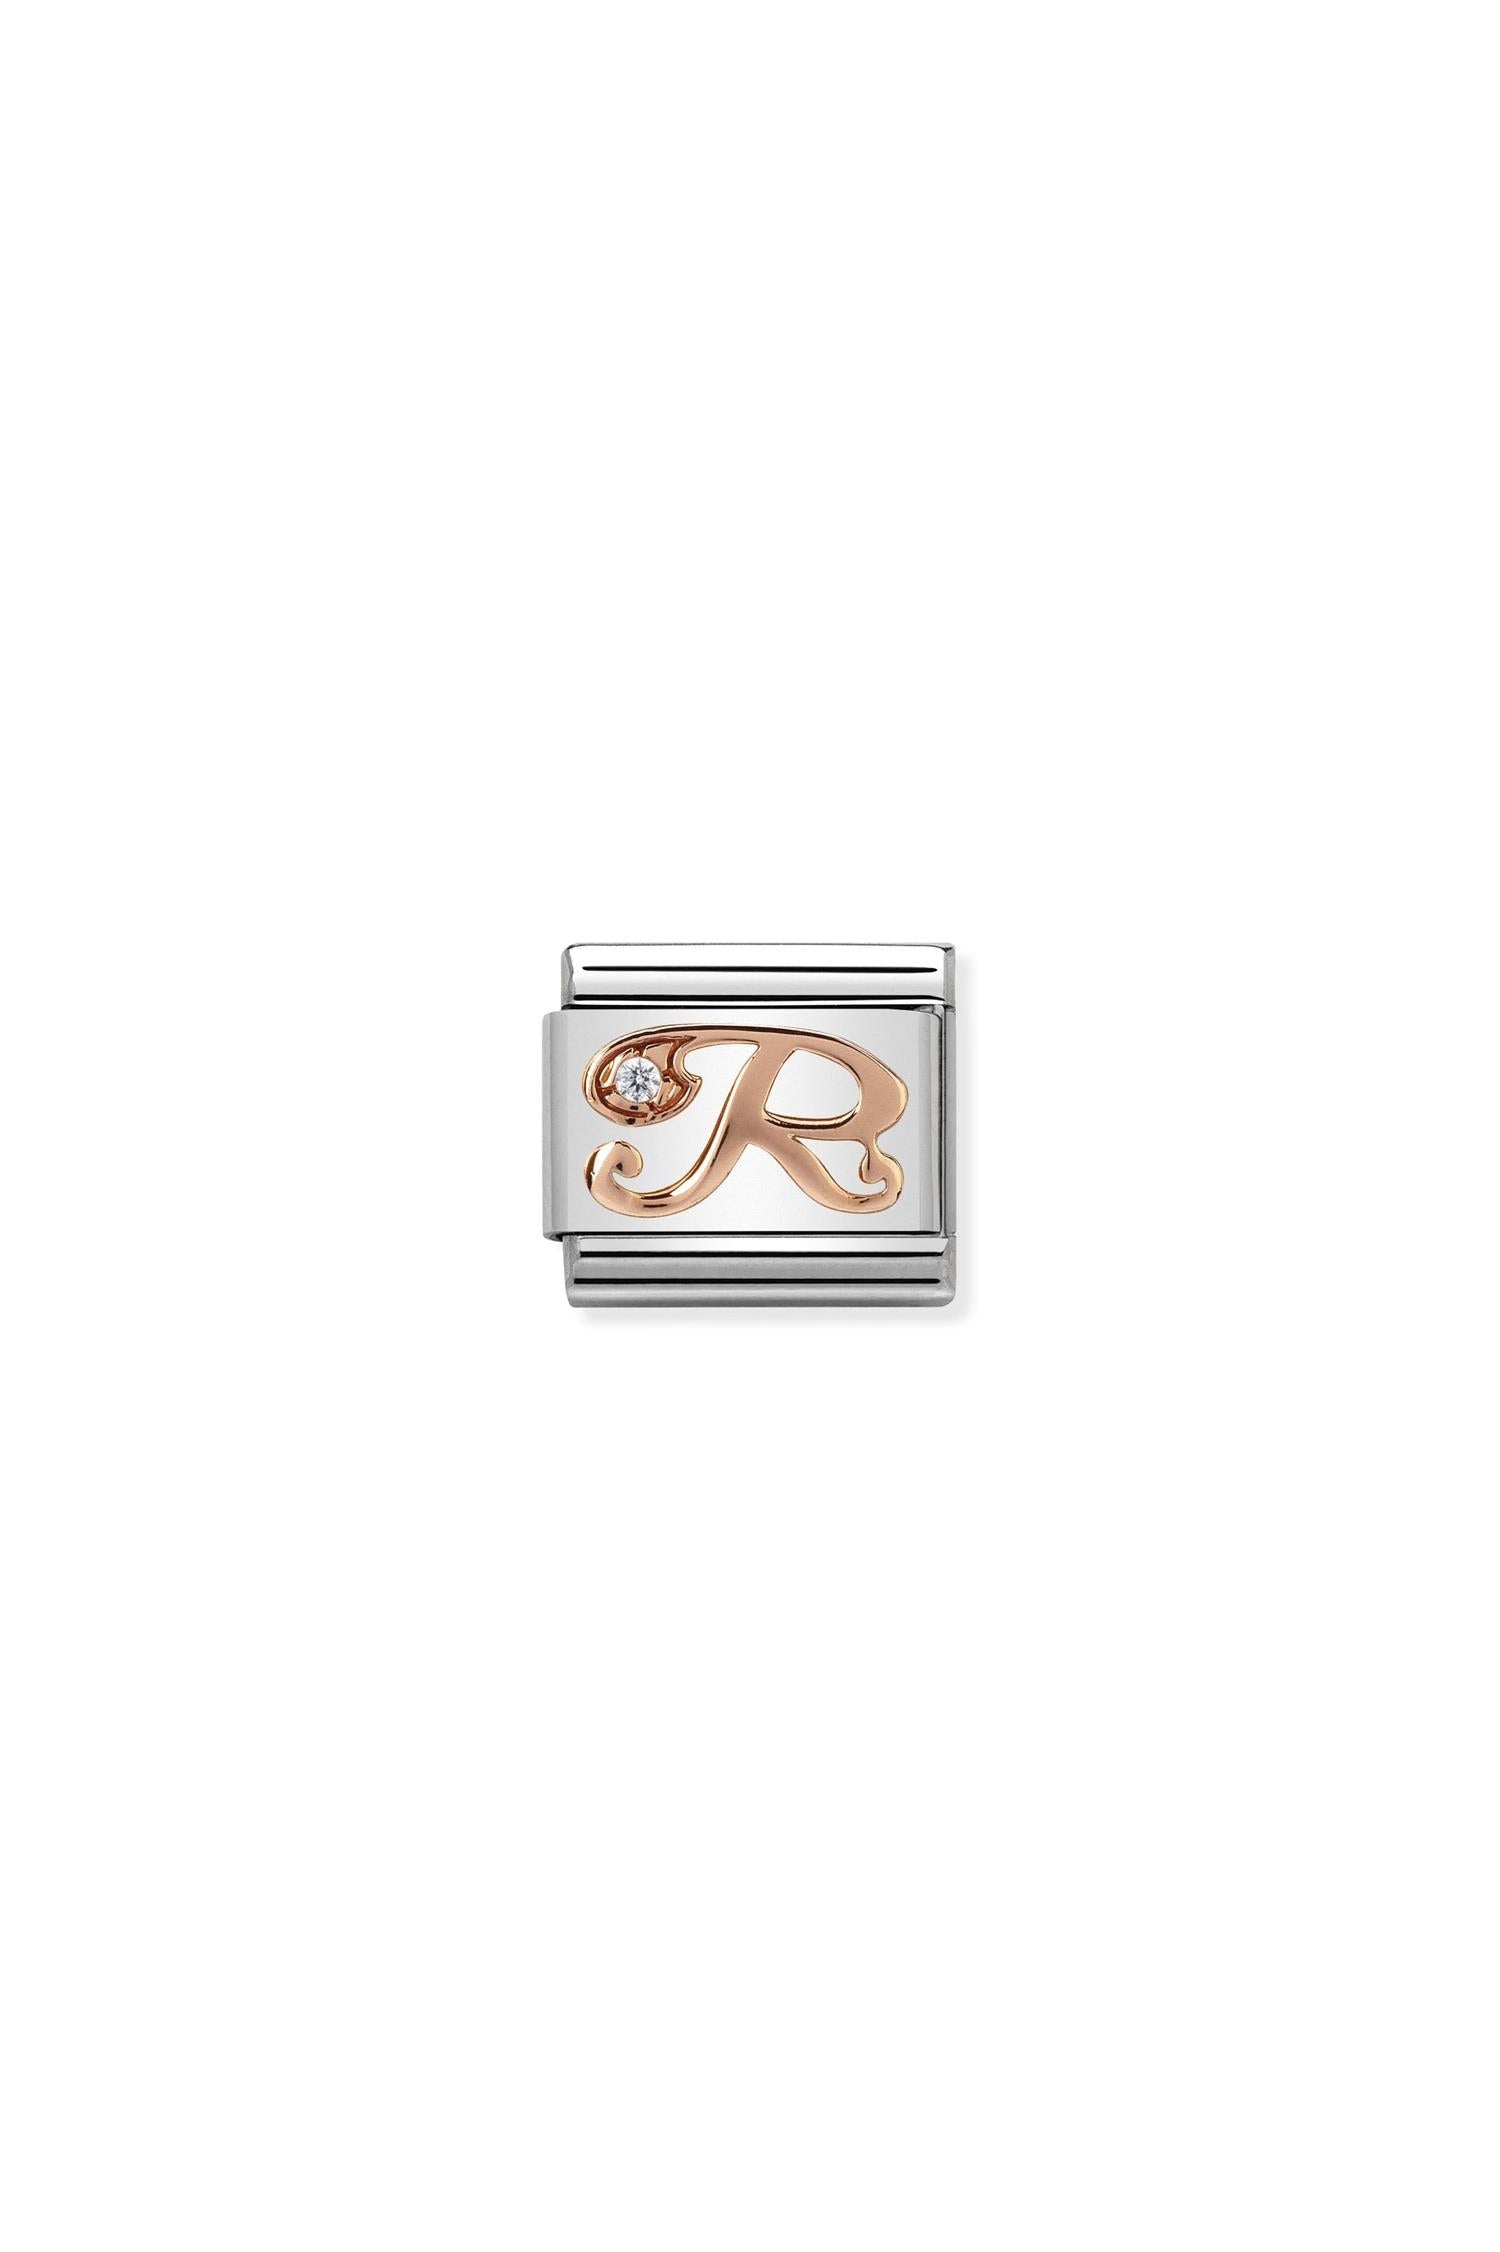 LETTERS 9k rose gold and CZ R